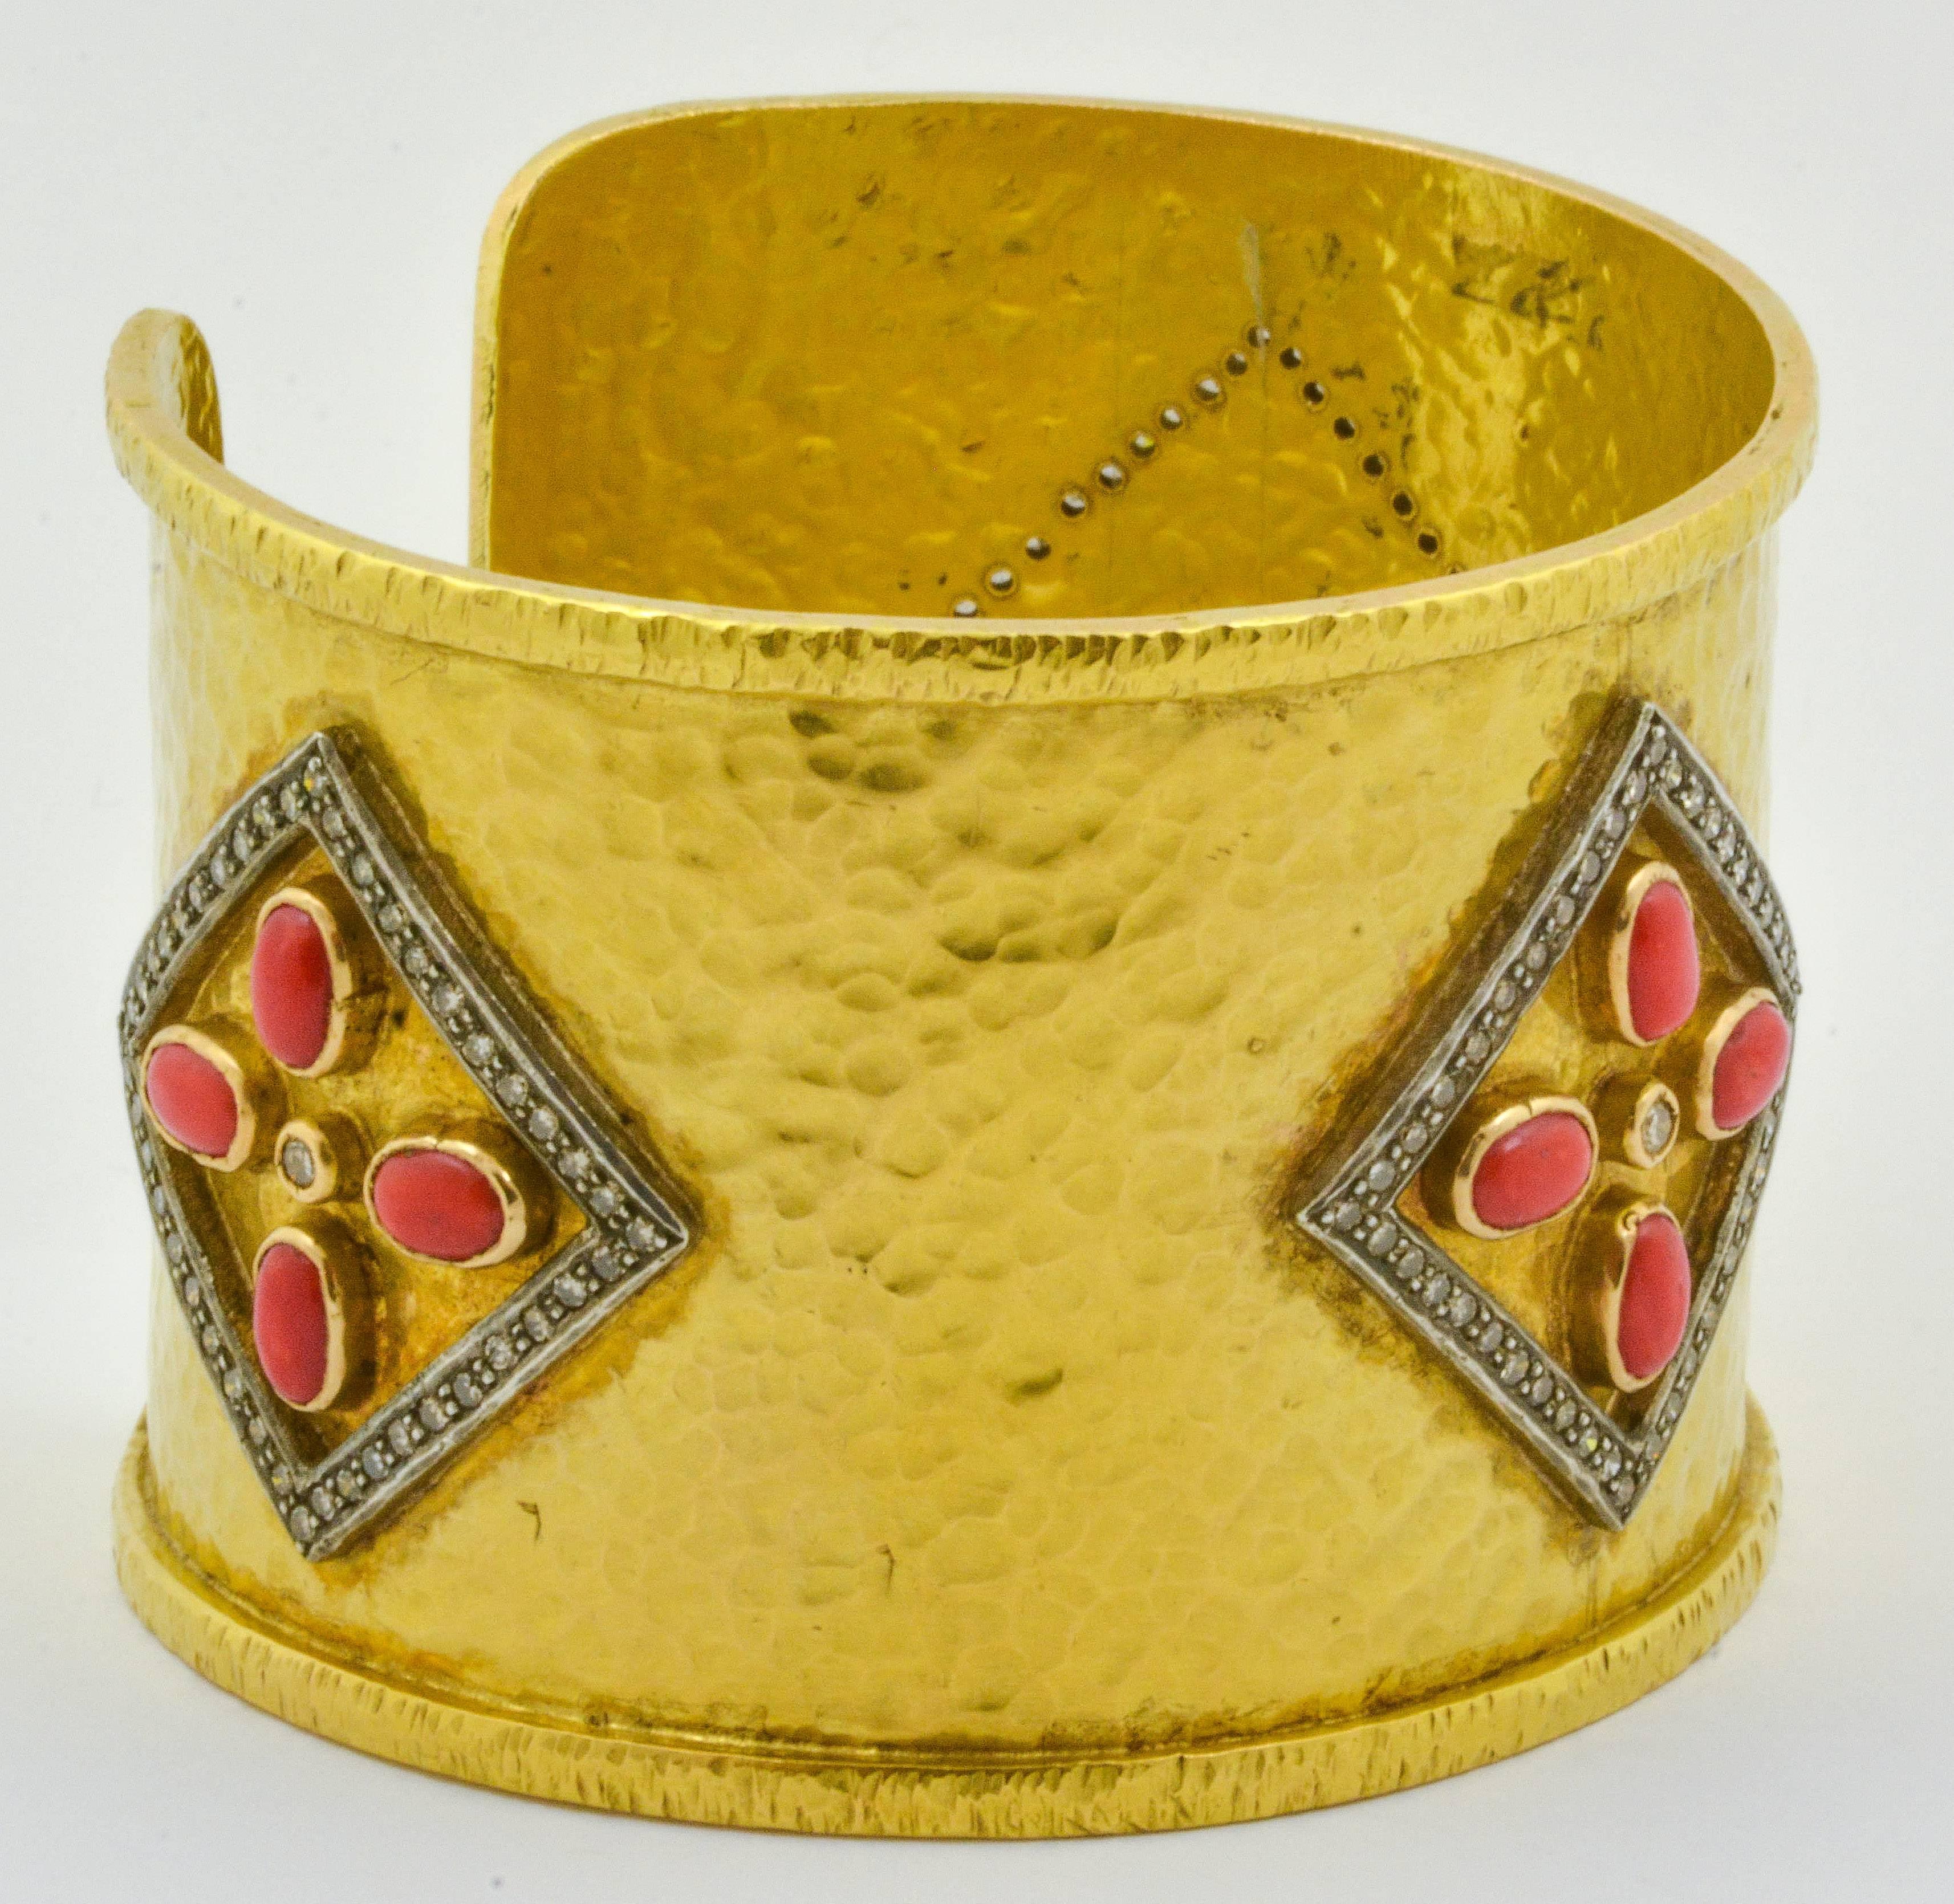 This strikingly beautiful 18kt yellow gold estate cuff bracelet features twelve oval-cut pieces of richly colored coral. They are set in groups of four framed by sterling silver diamond set halos. This unique masterpiece measures 40.44mm wide and